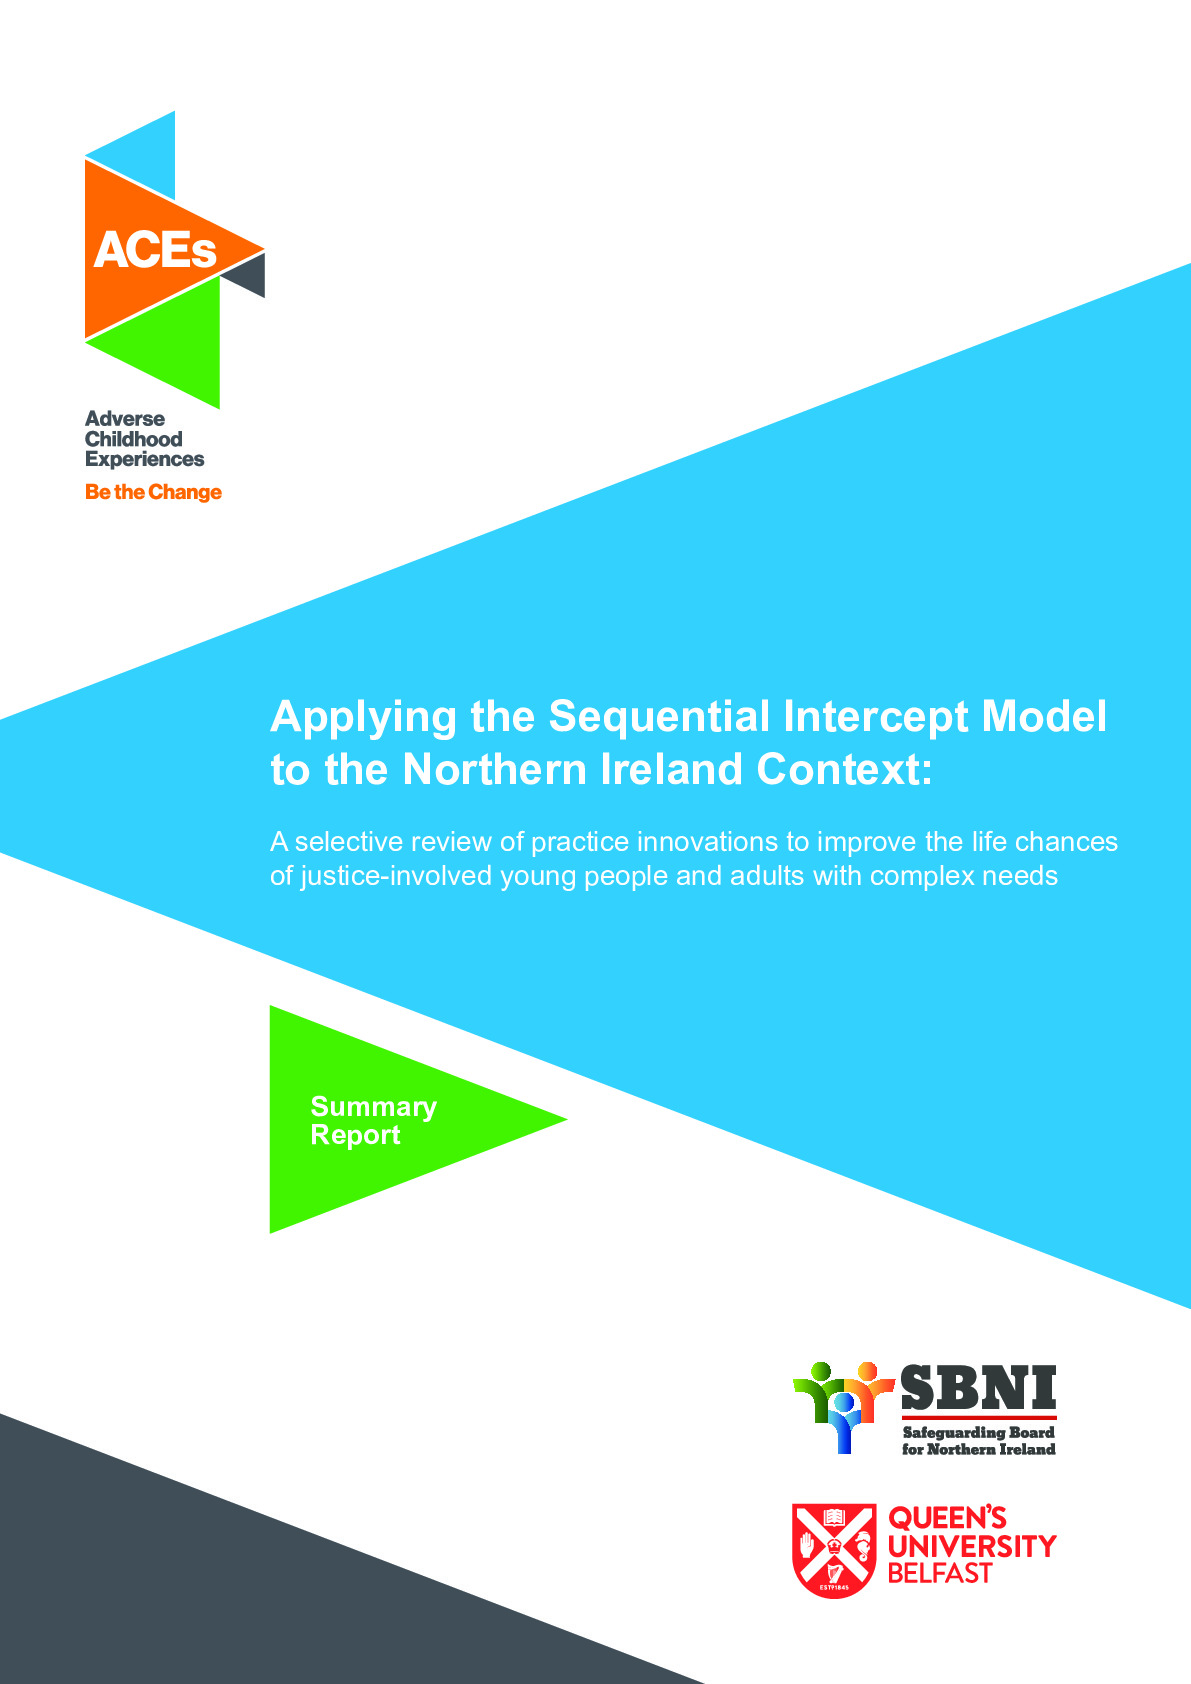 Applying the Sequential Intercept Model to the NI Context (Summary Report)